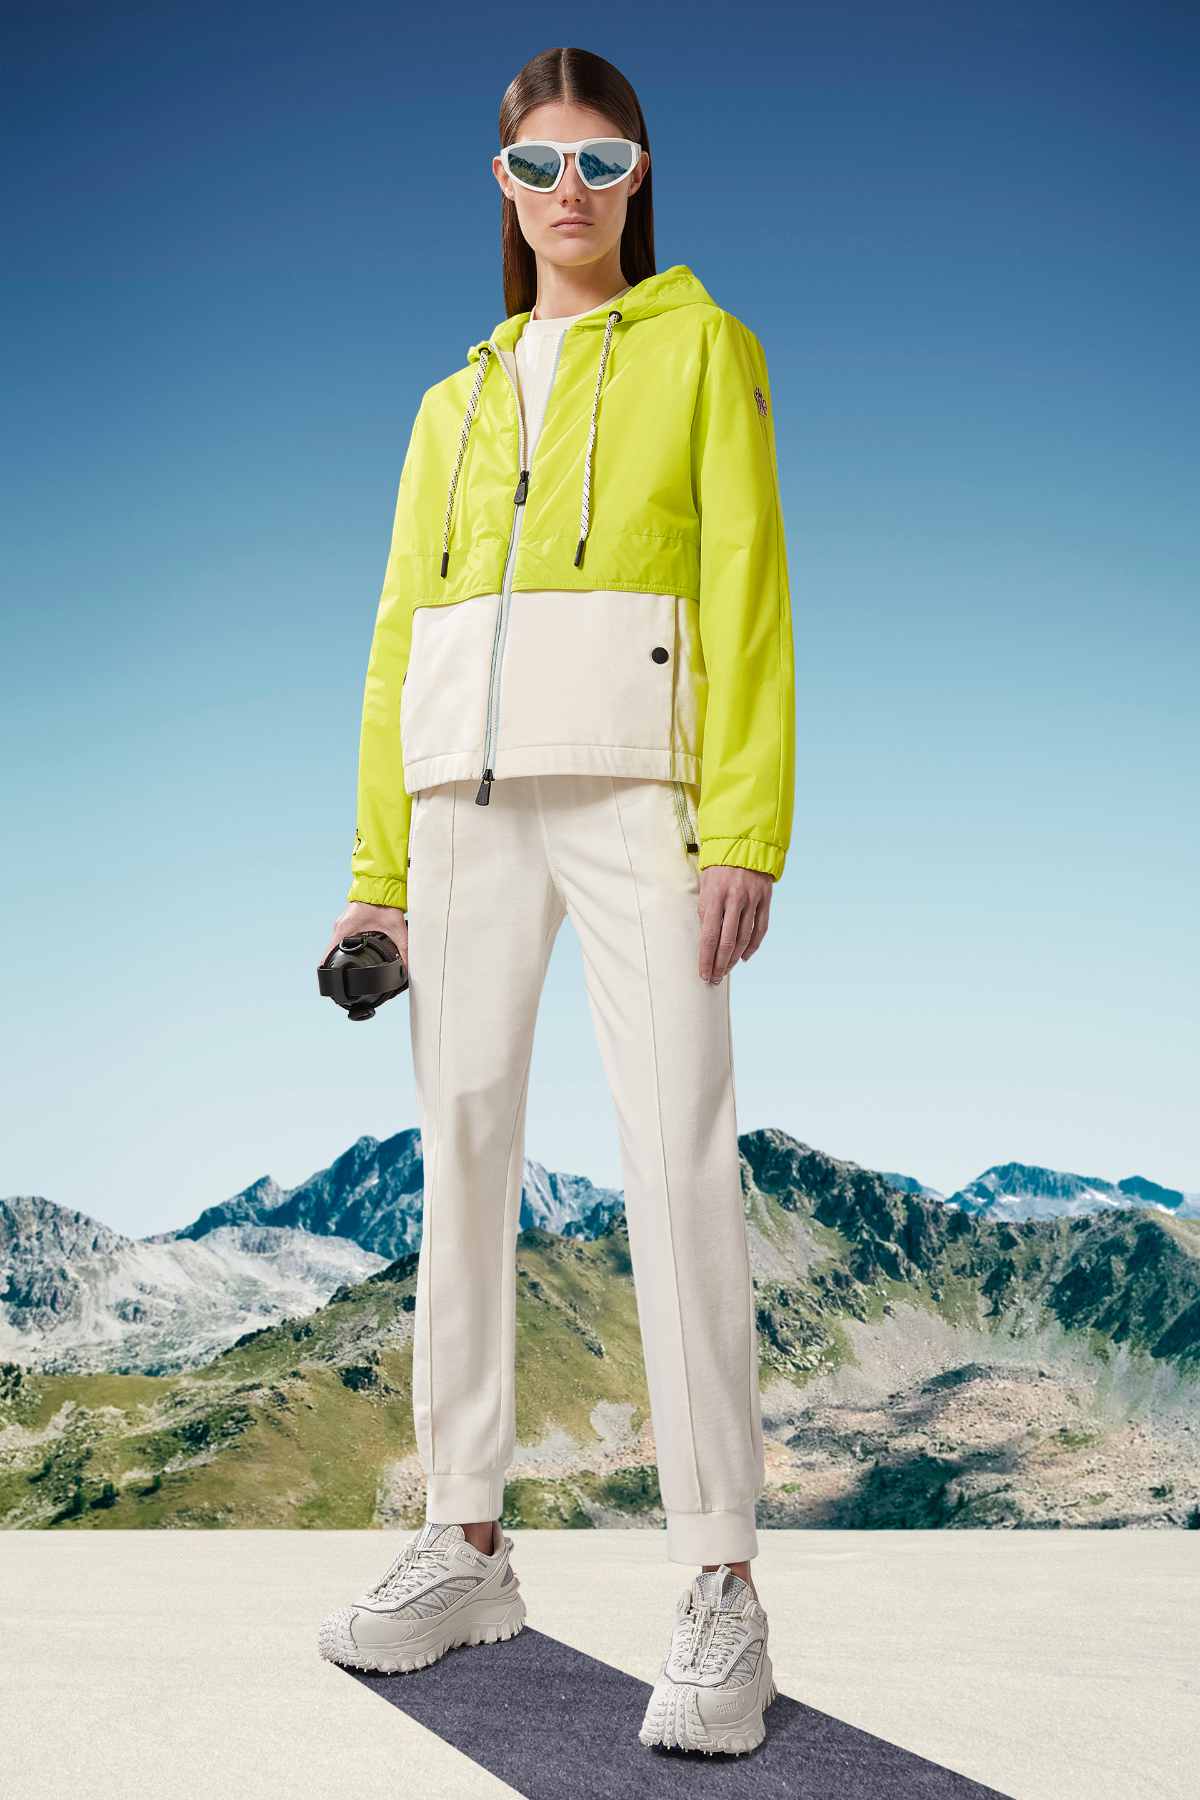 Moncler Presents Its New Grenoble Spring/Summer 2023 Collection